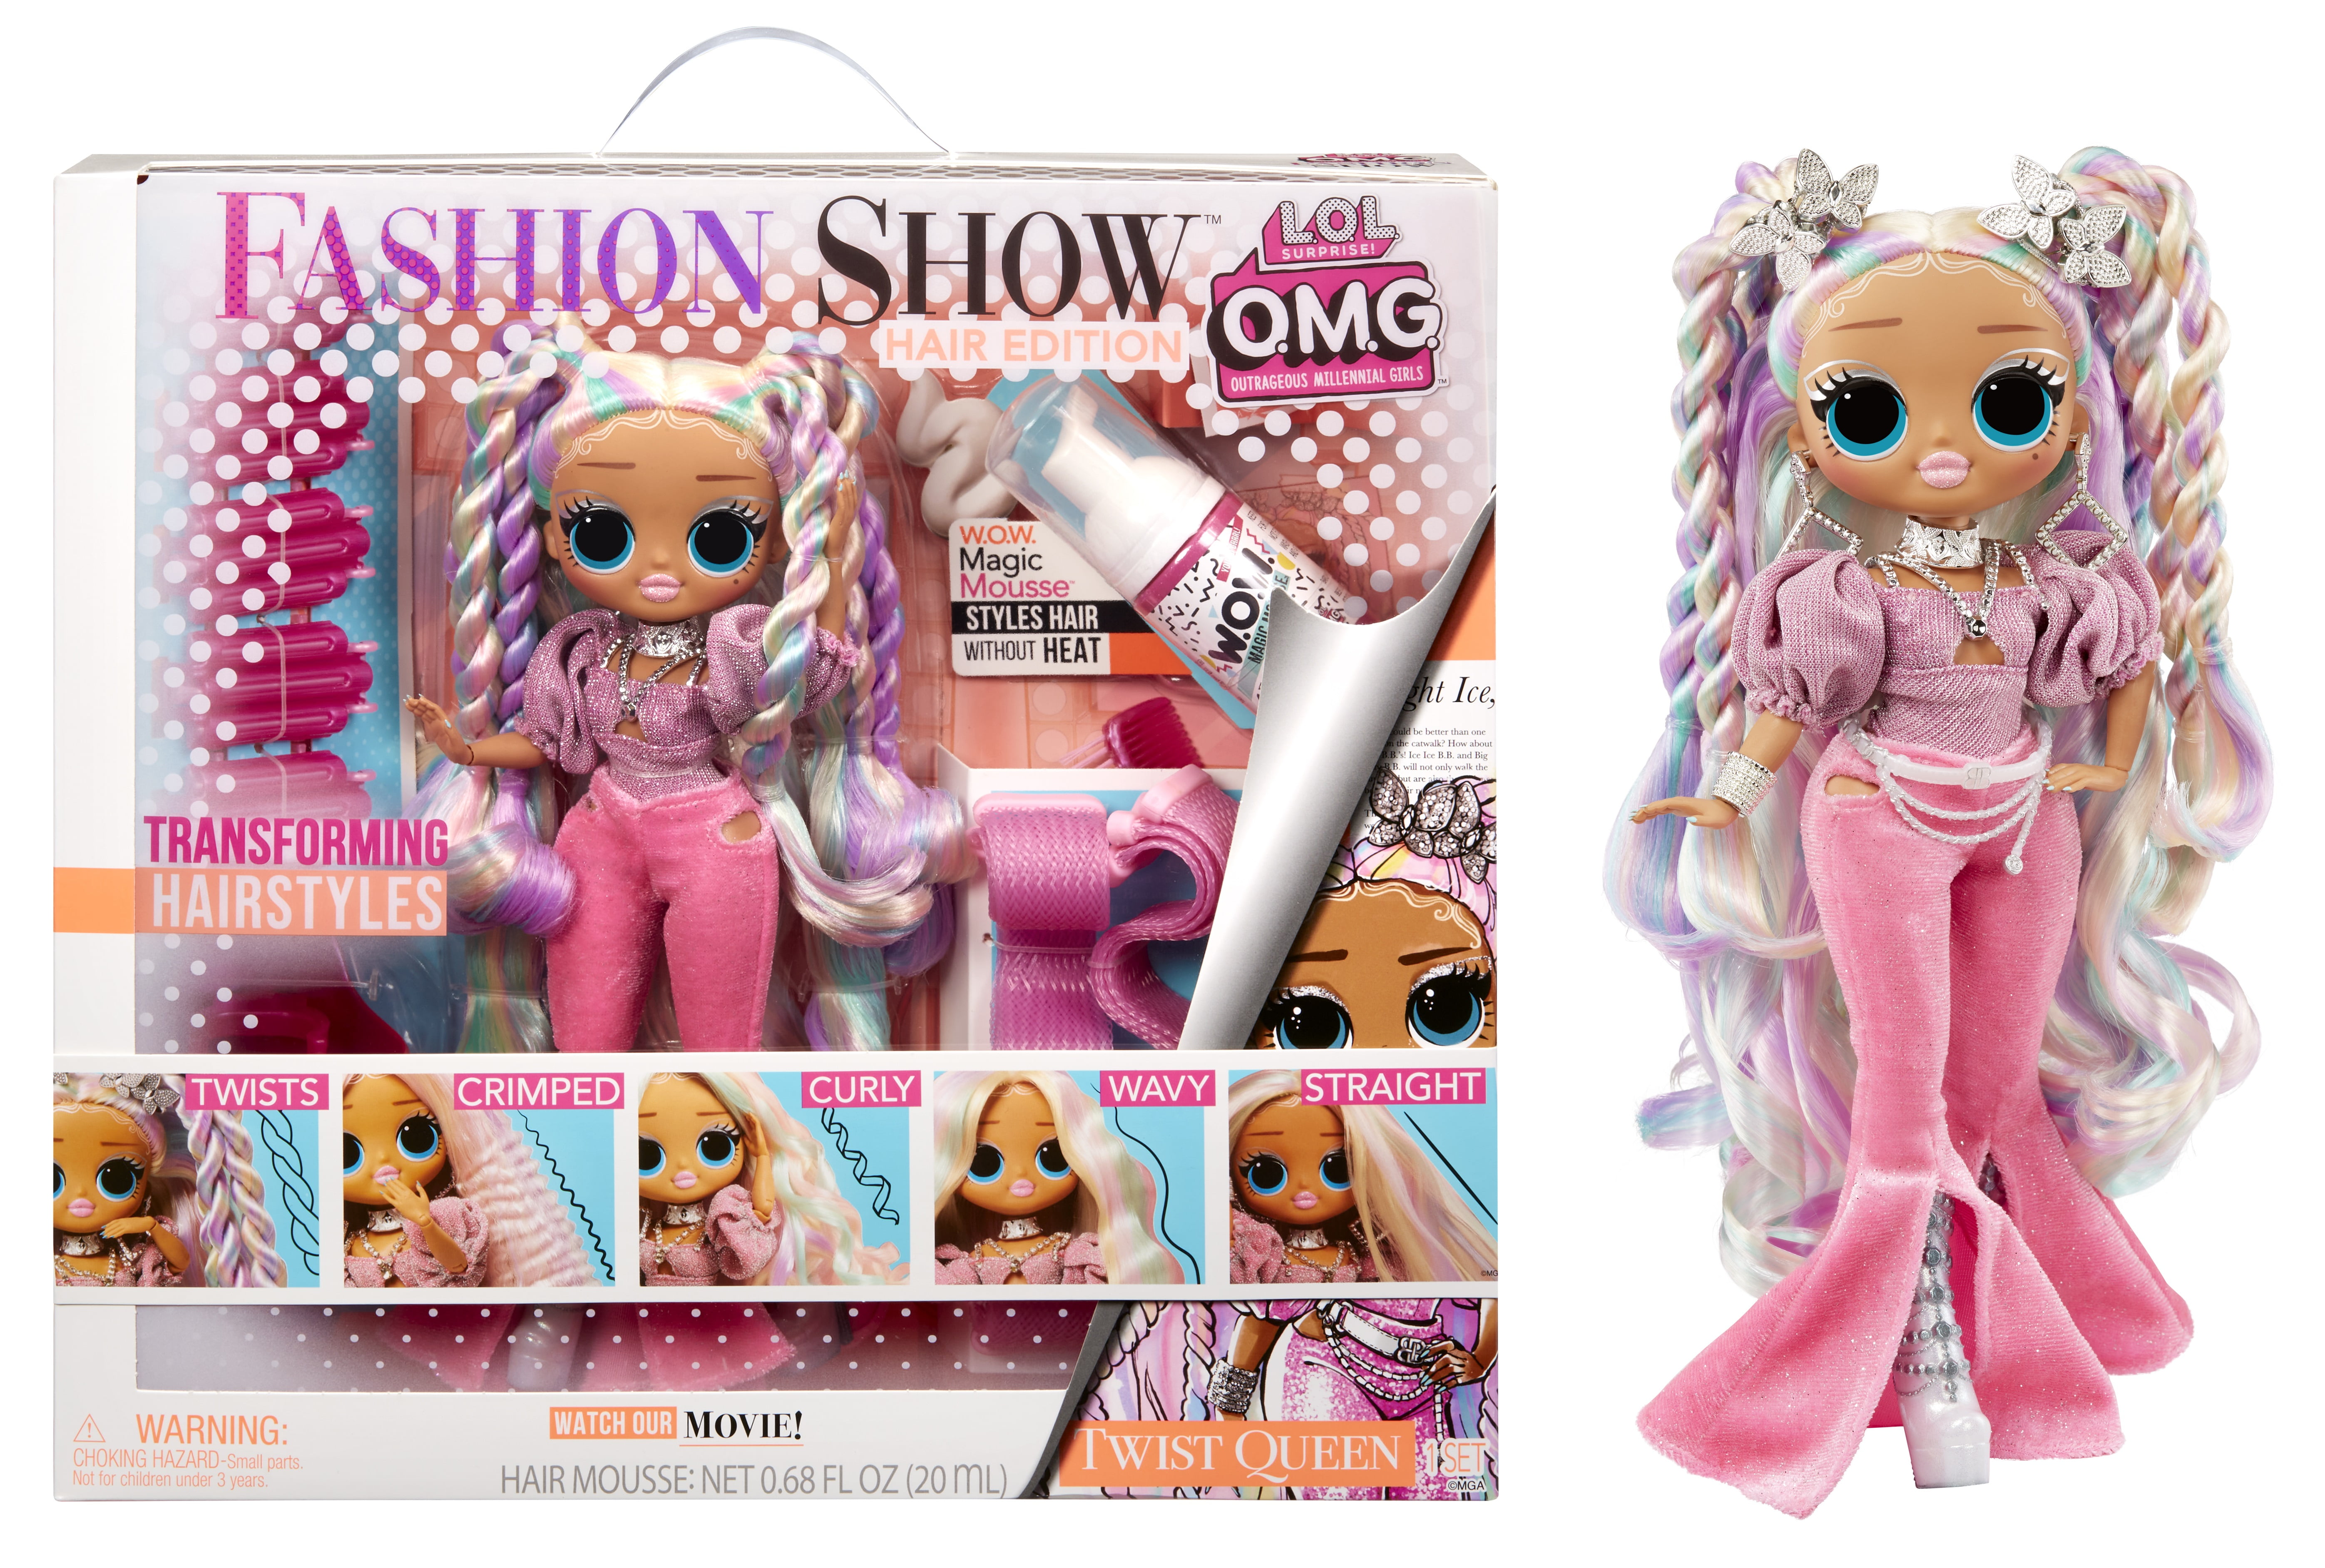 LOL Surprise OMG Swag Fashion Doll– Great Gift for Kids Ages 4 5 6+ 